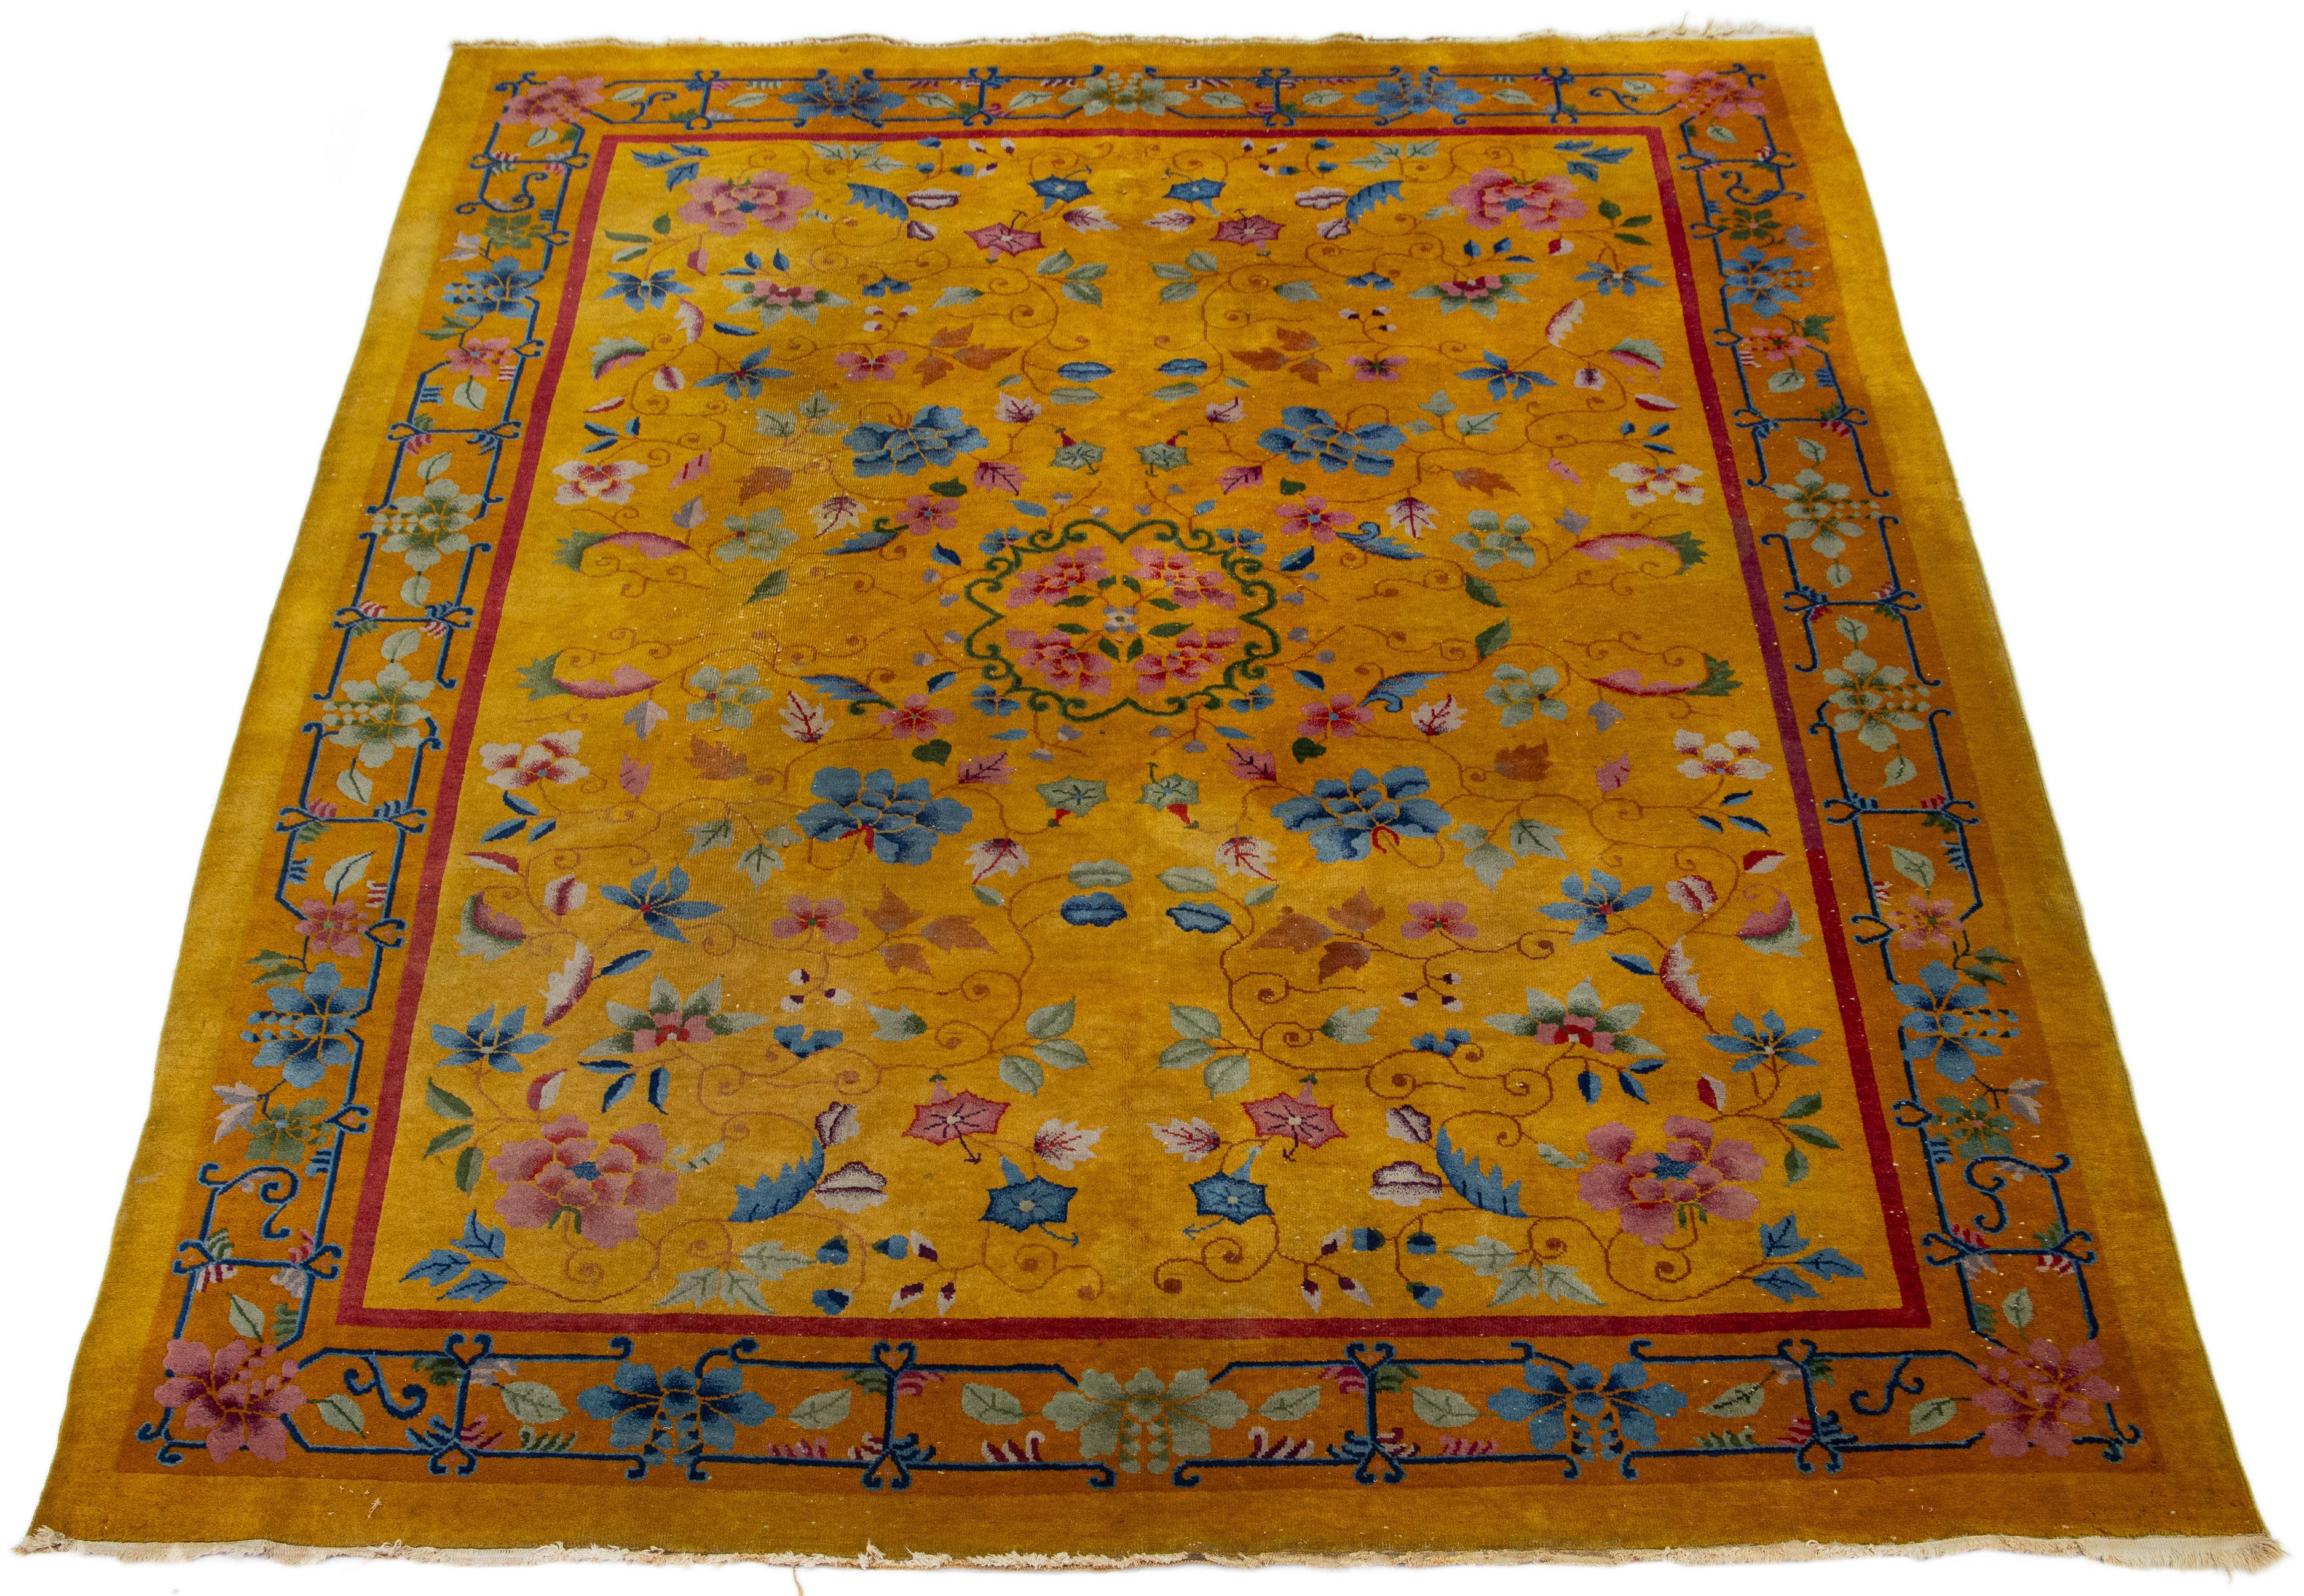 Beautiful 1920s antique Chinese Art Deco hand-knotted wool rug with goldenrod color field. This piece has a designed frame in multicolor hues adorned with a classic Chinese floral design.


This rug measures 8' 10